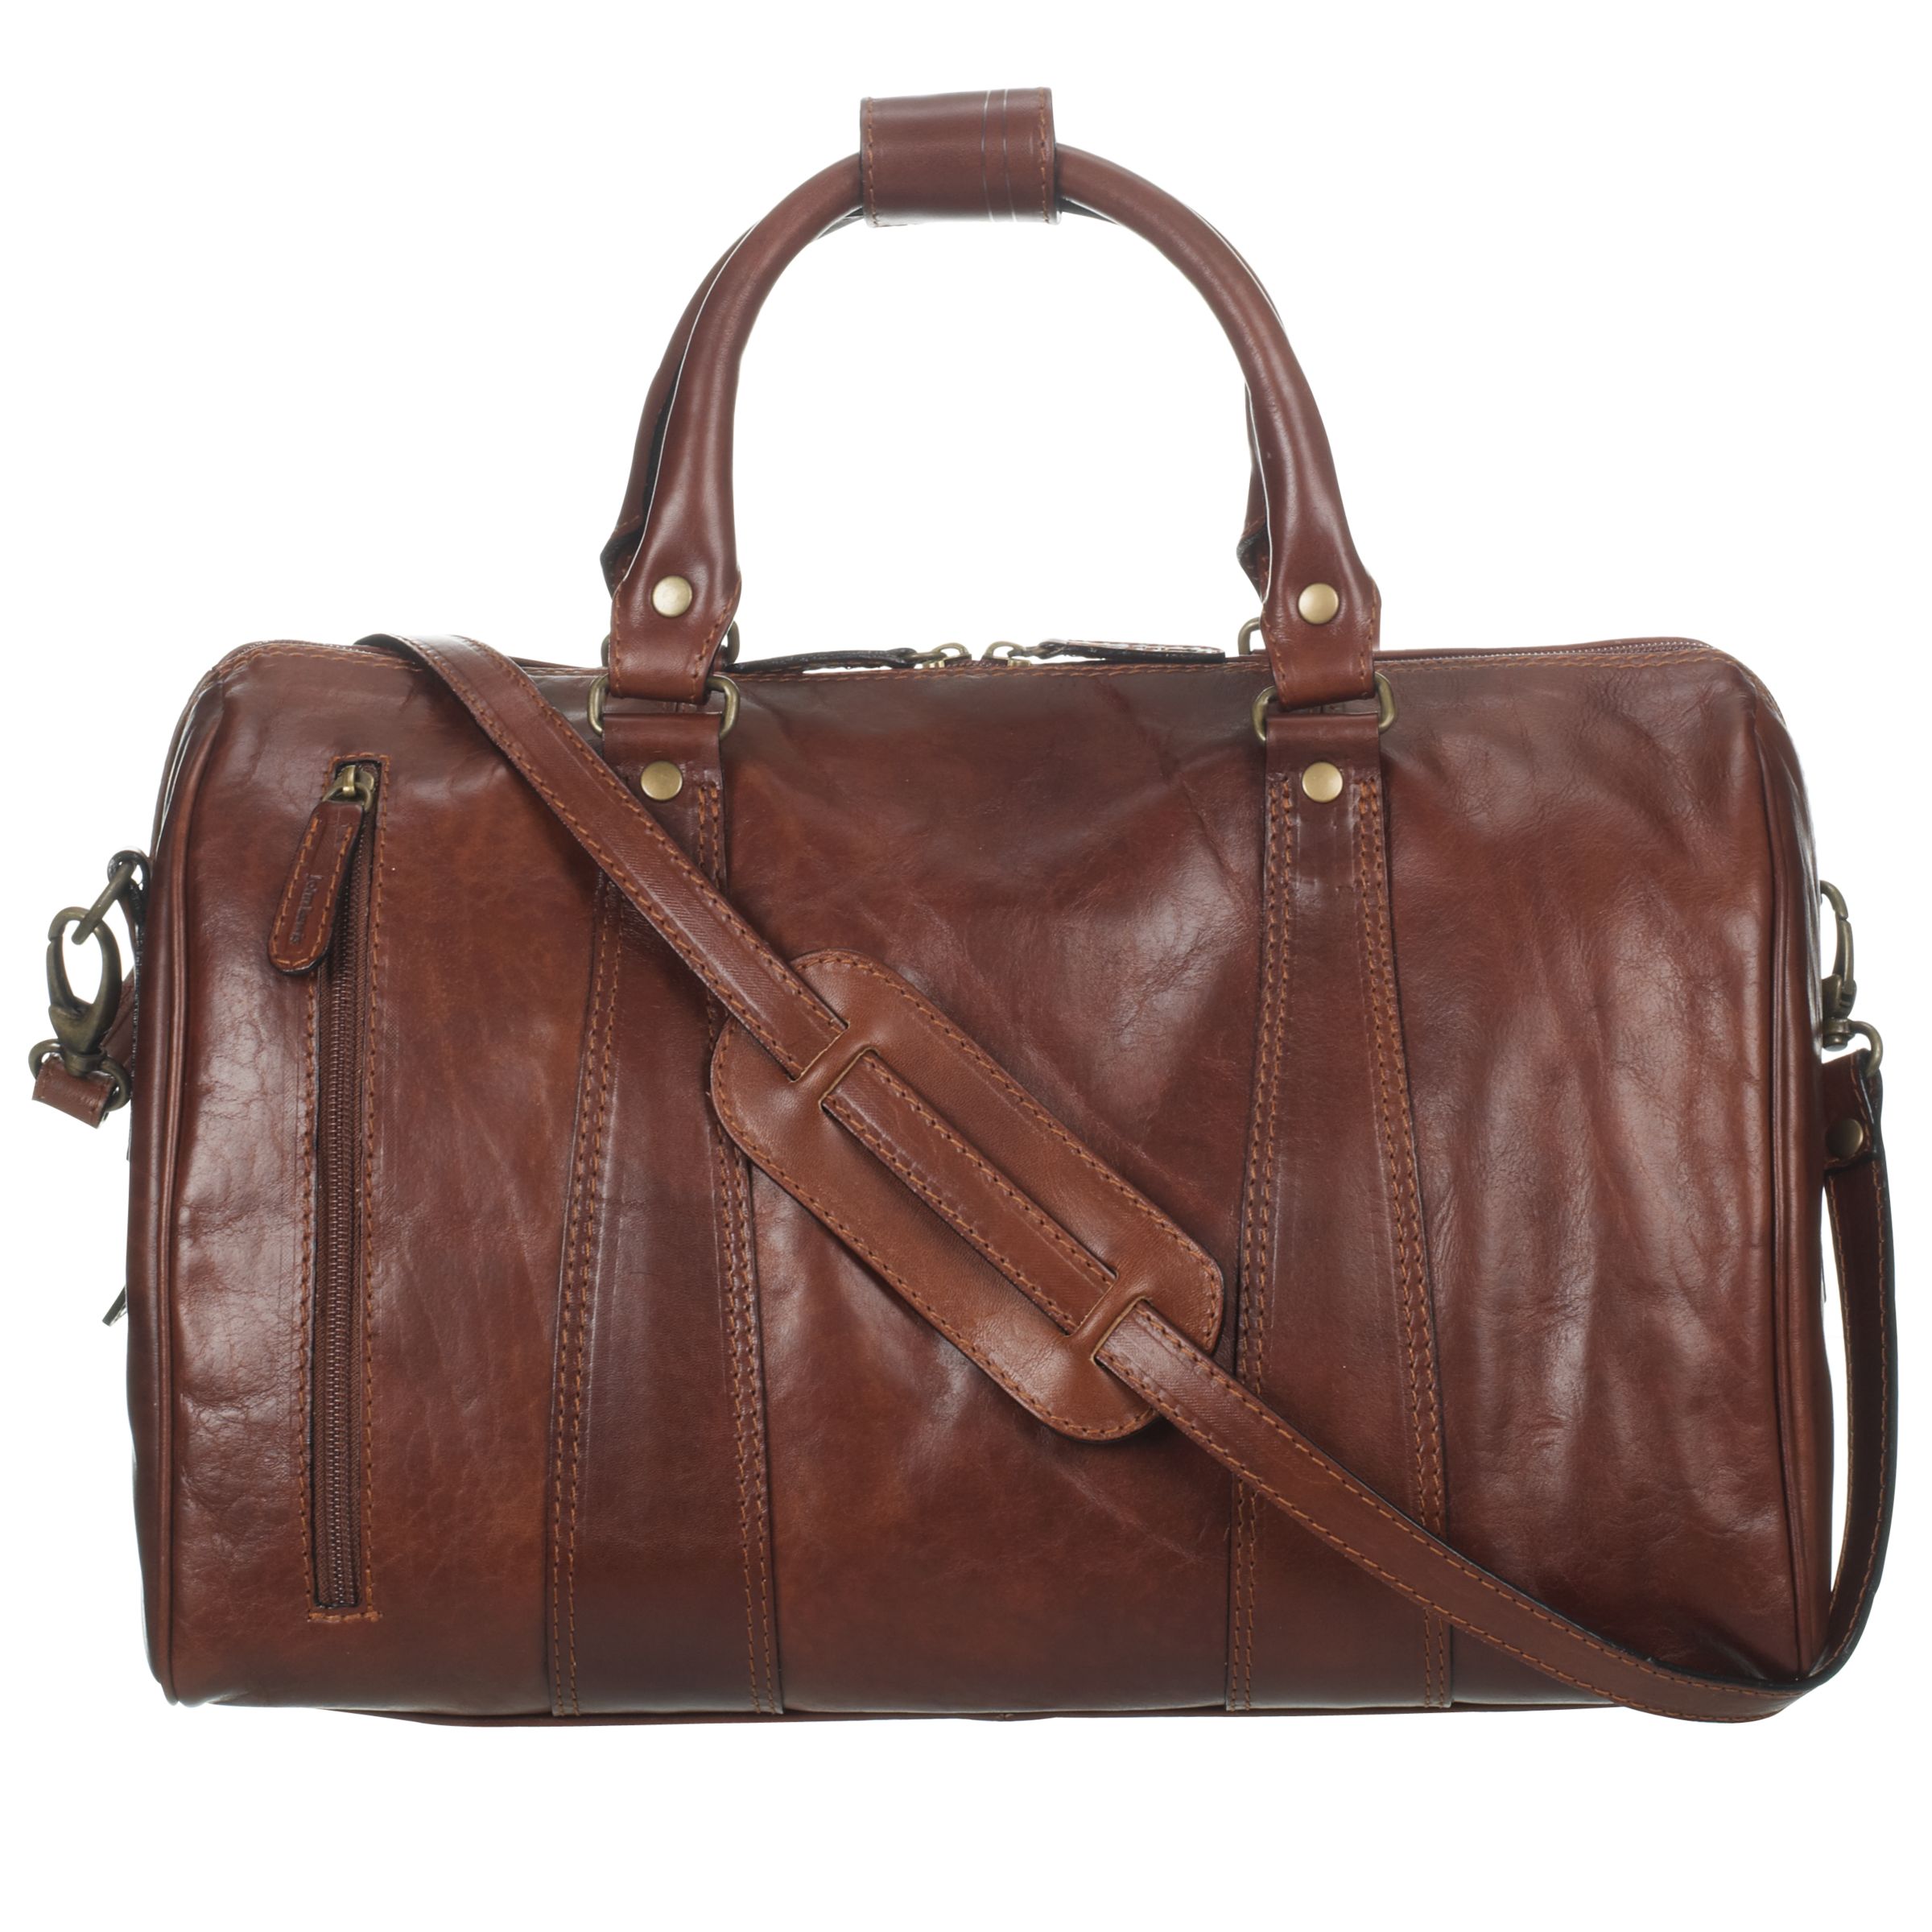 John Lewis New Travel Leather Holdall, Brown, Small at John Lewis